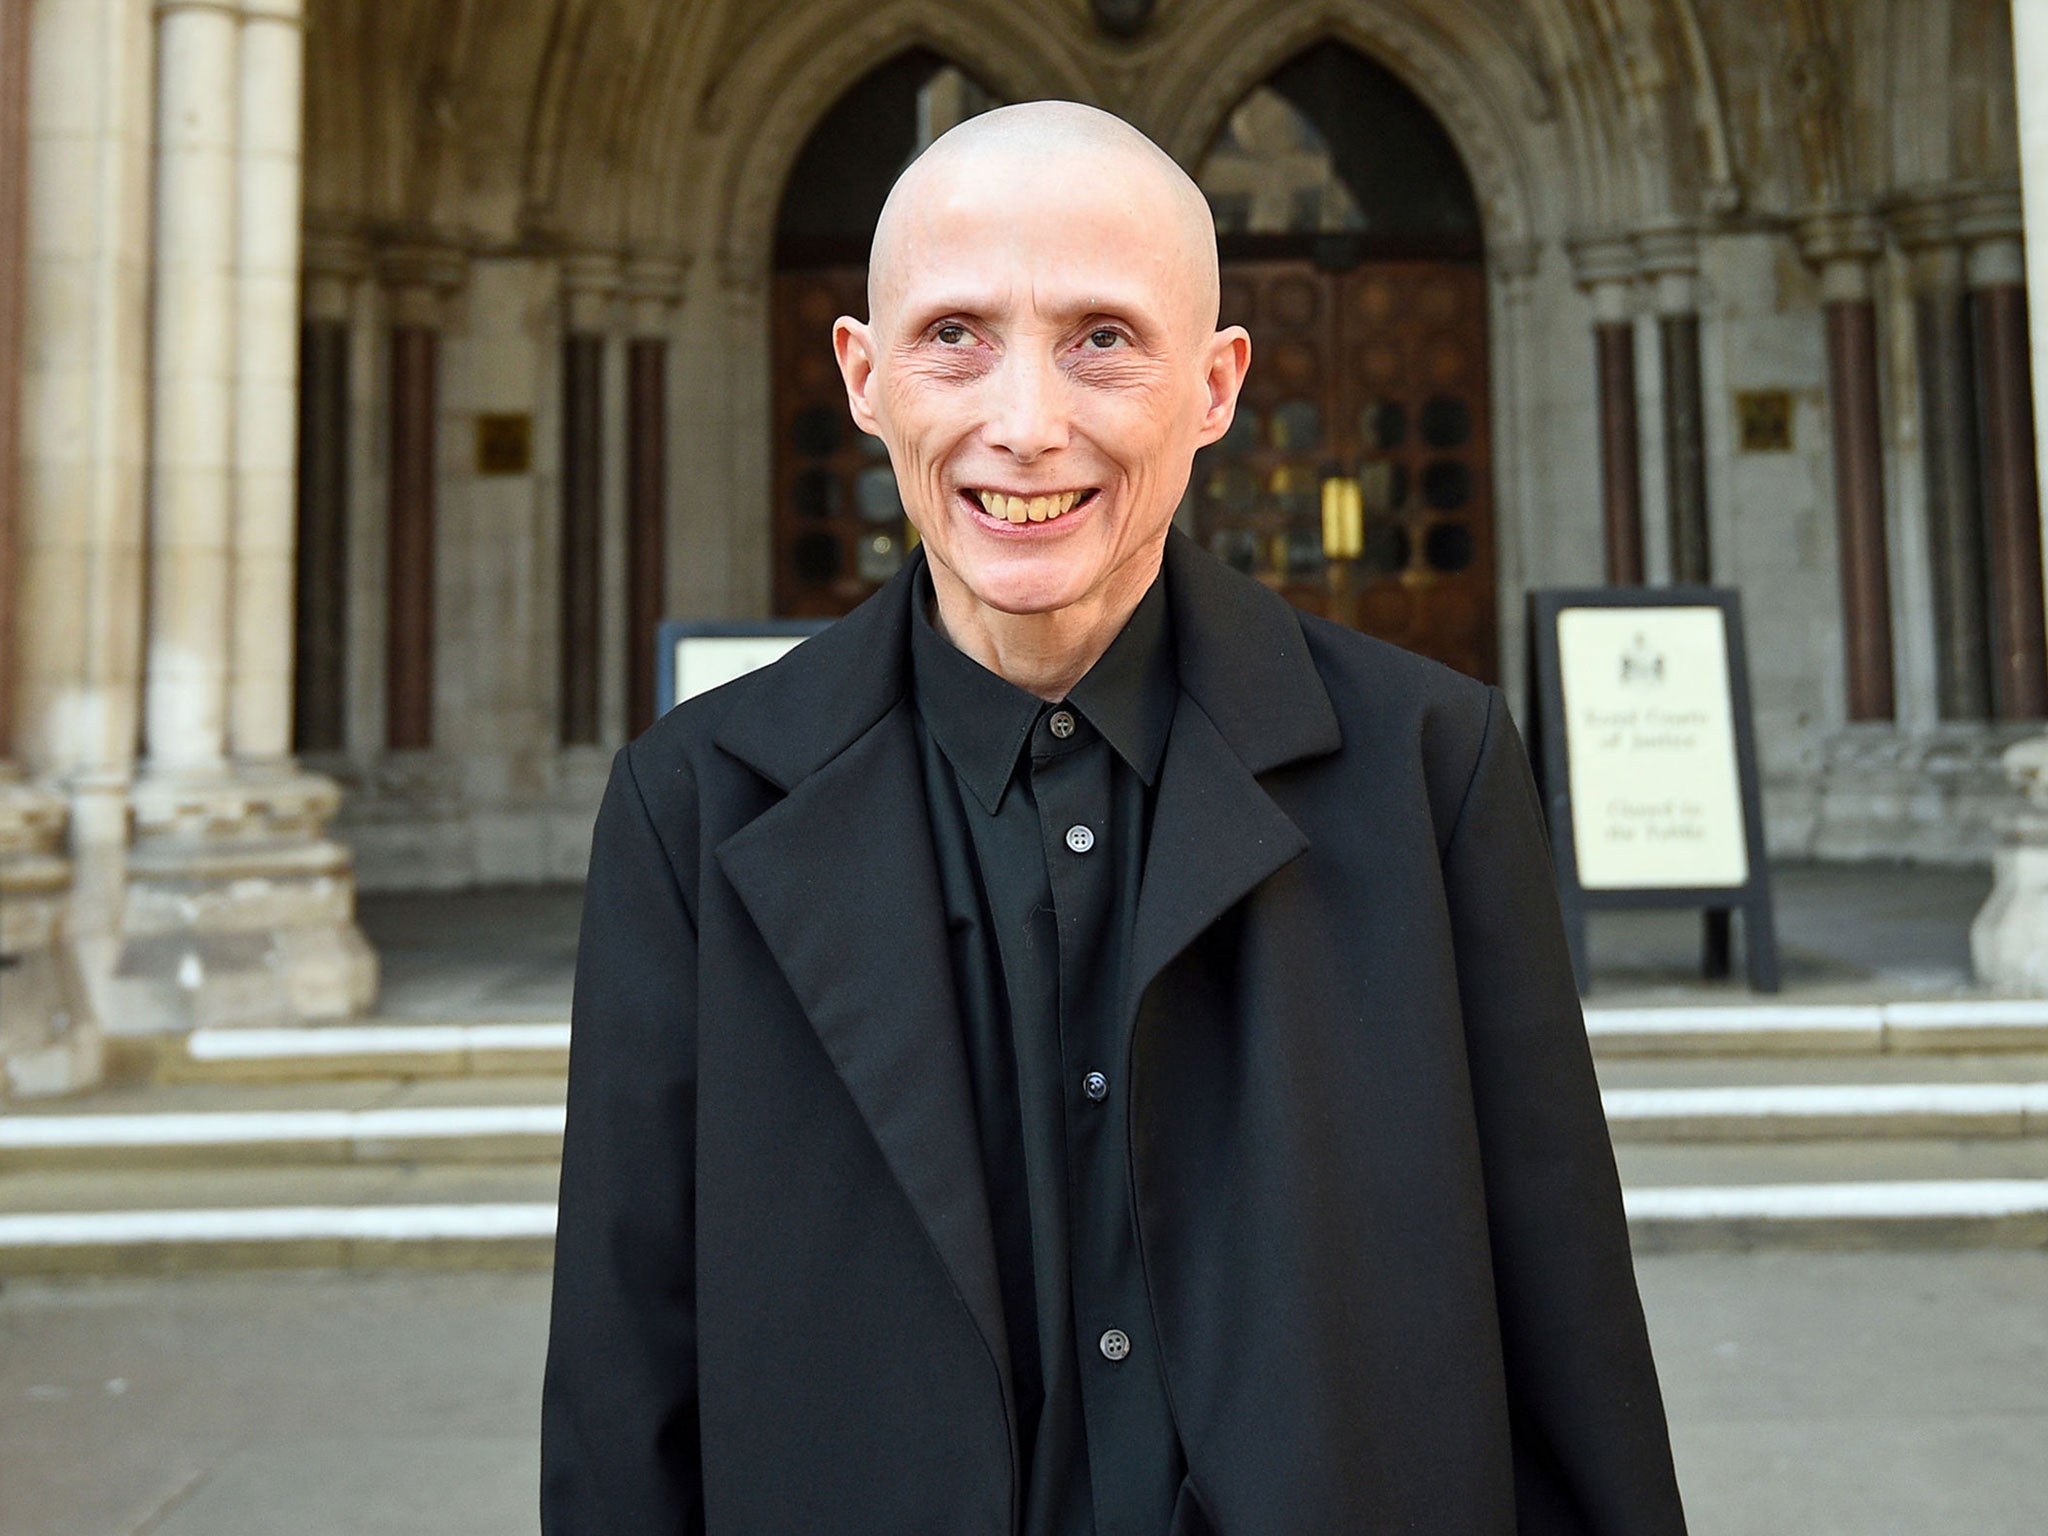 Christie Elan-Cane, who is campaigning for gender-neutral passports, outside the Royal Courts of Justice in London.